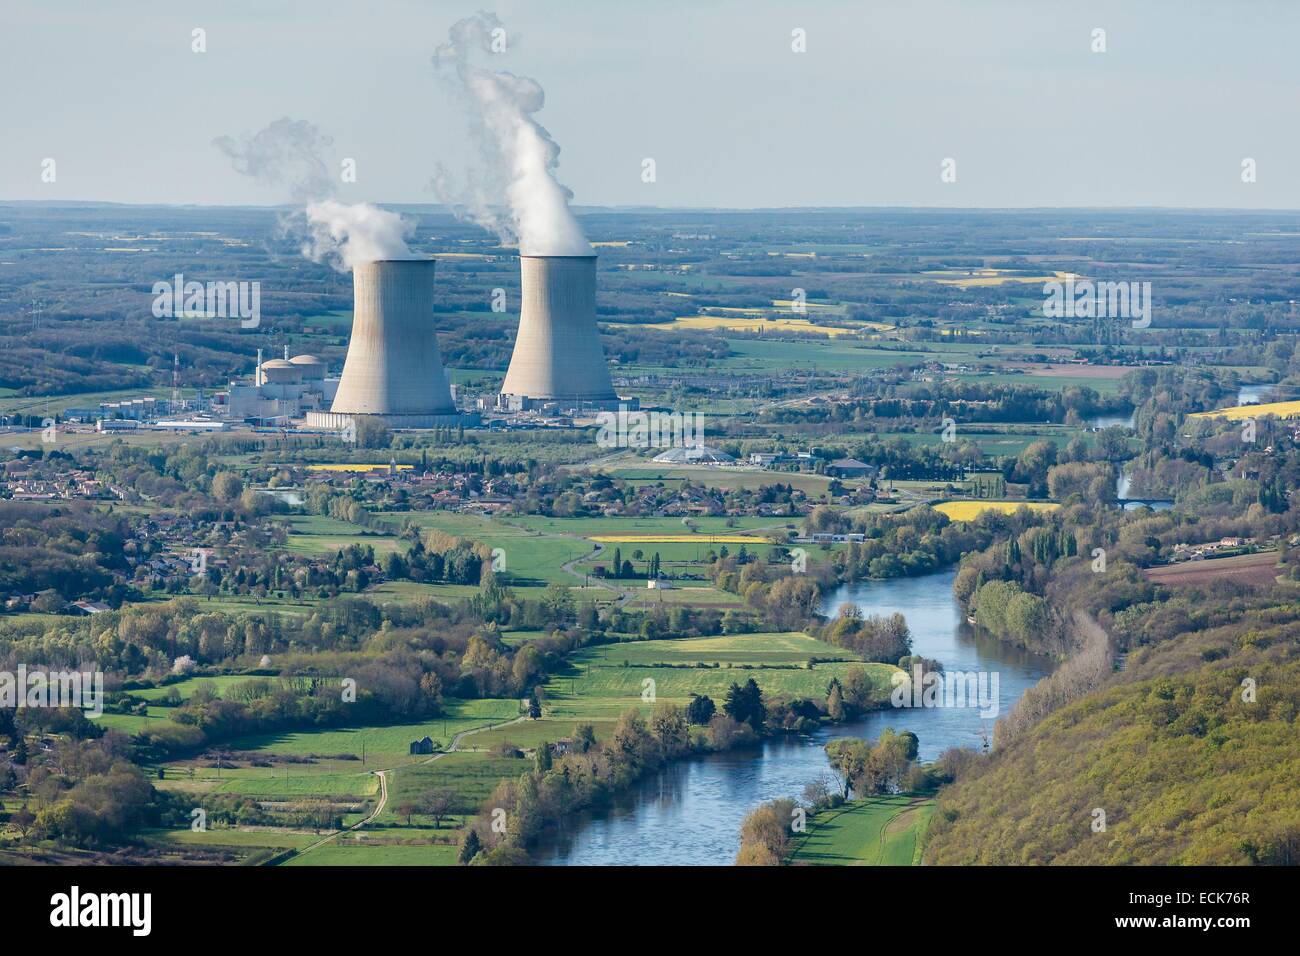 France, Vienne, Civaux, nuclear power station near the Vienne river (aerial view) Stock Photo